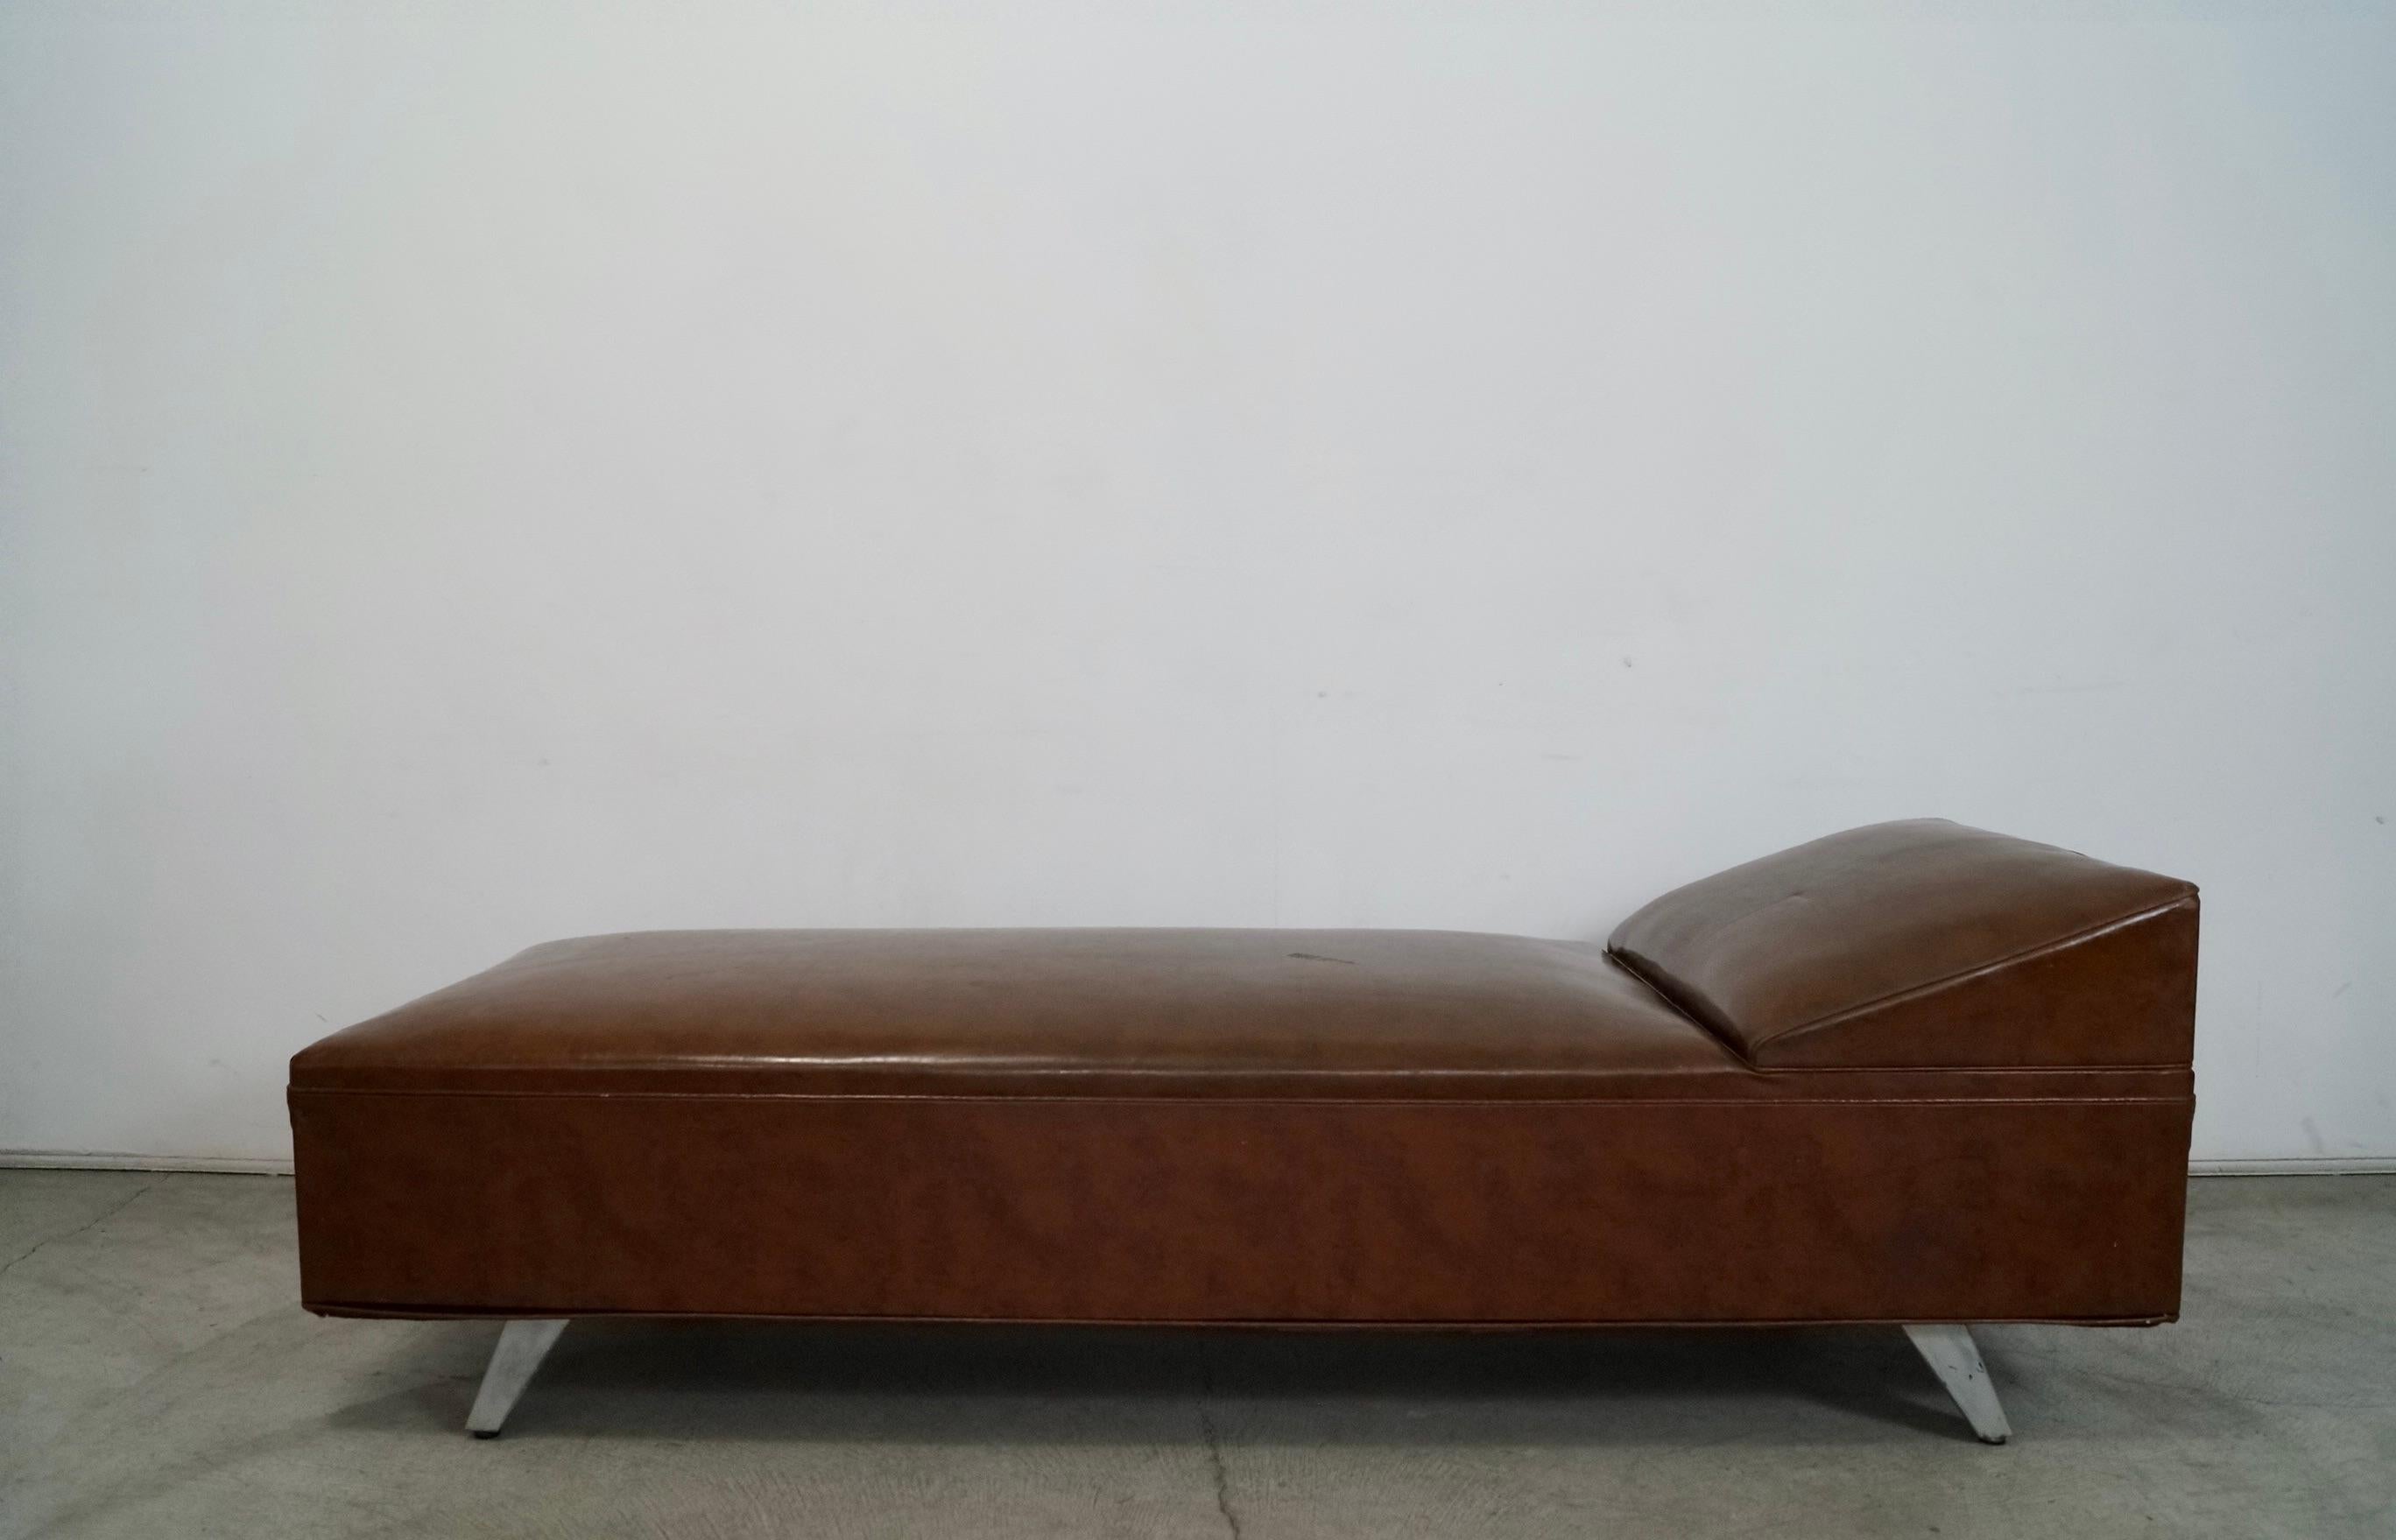 Vintage original Midcentury Modern daybed for sale. From the 1940's, and manufactured by Royal Metal Manufacturing Company with the original label still intact. It has the original tan naugahyde vinyl. It's in overall good condition with some